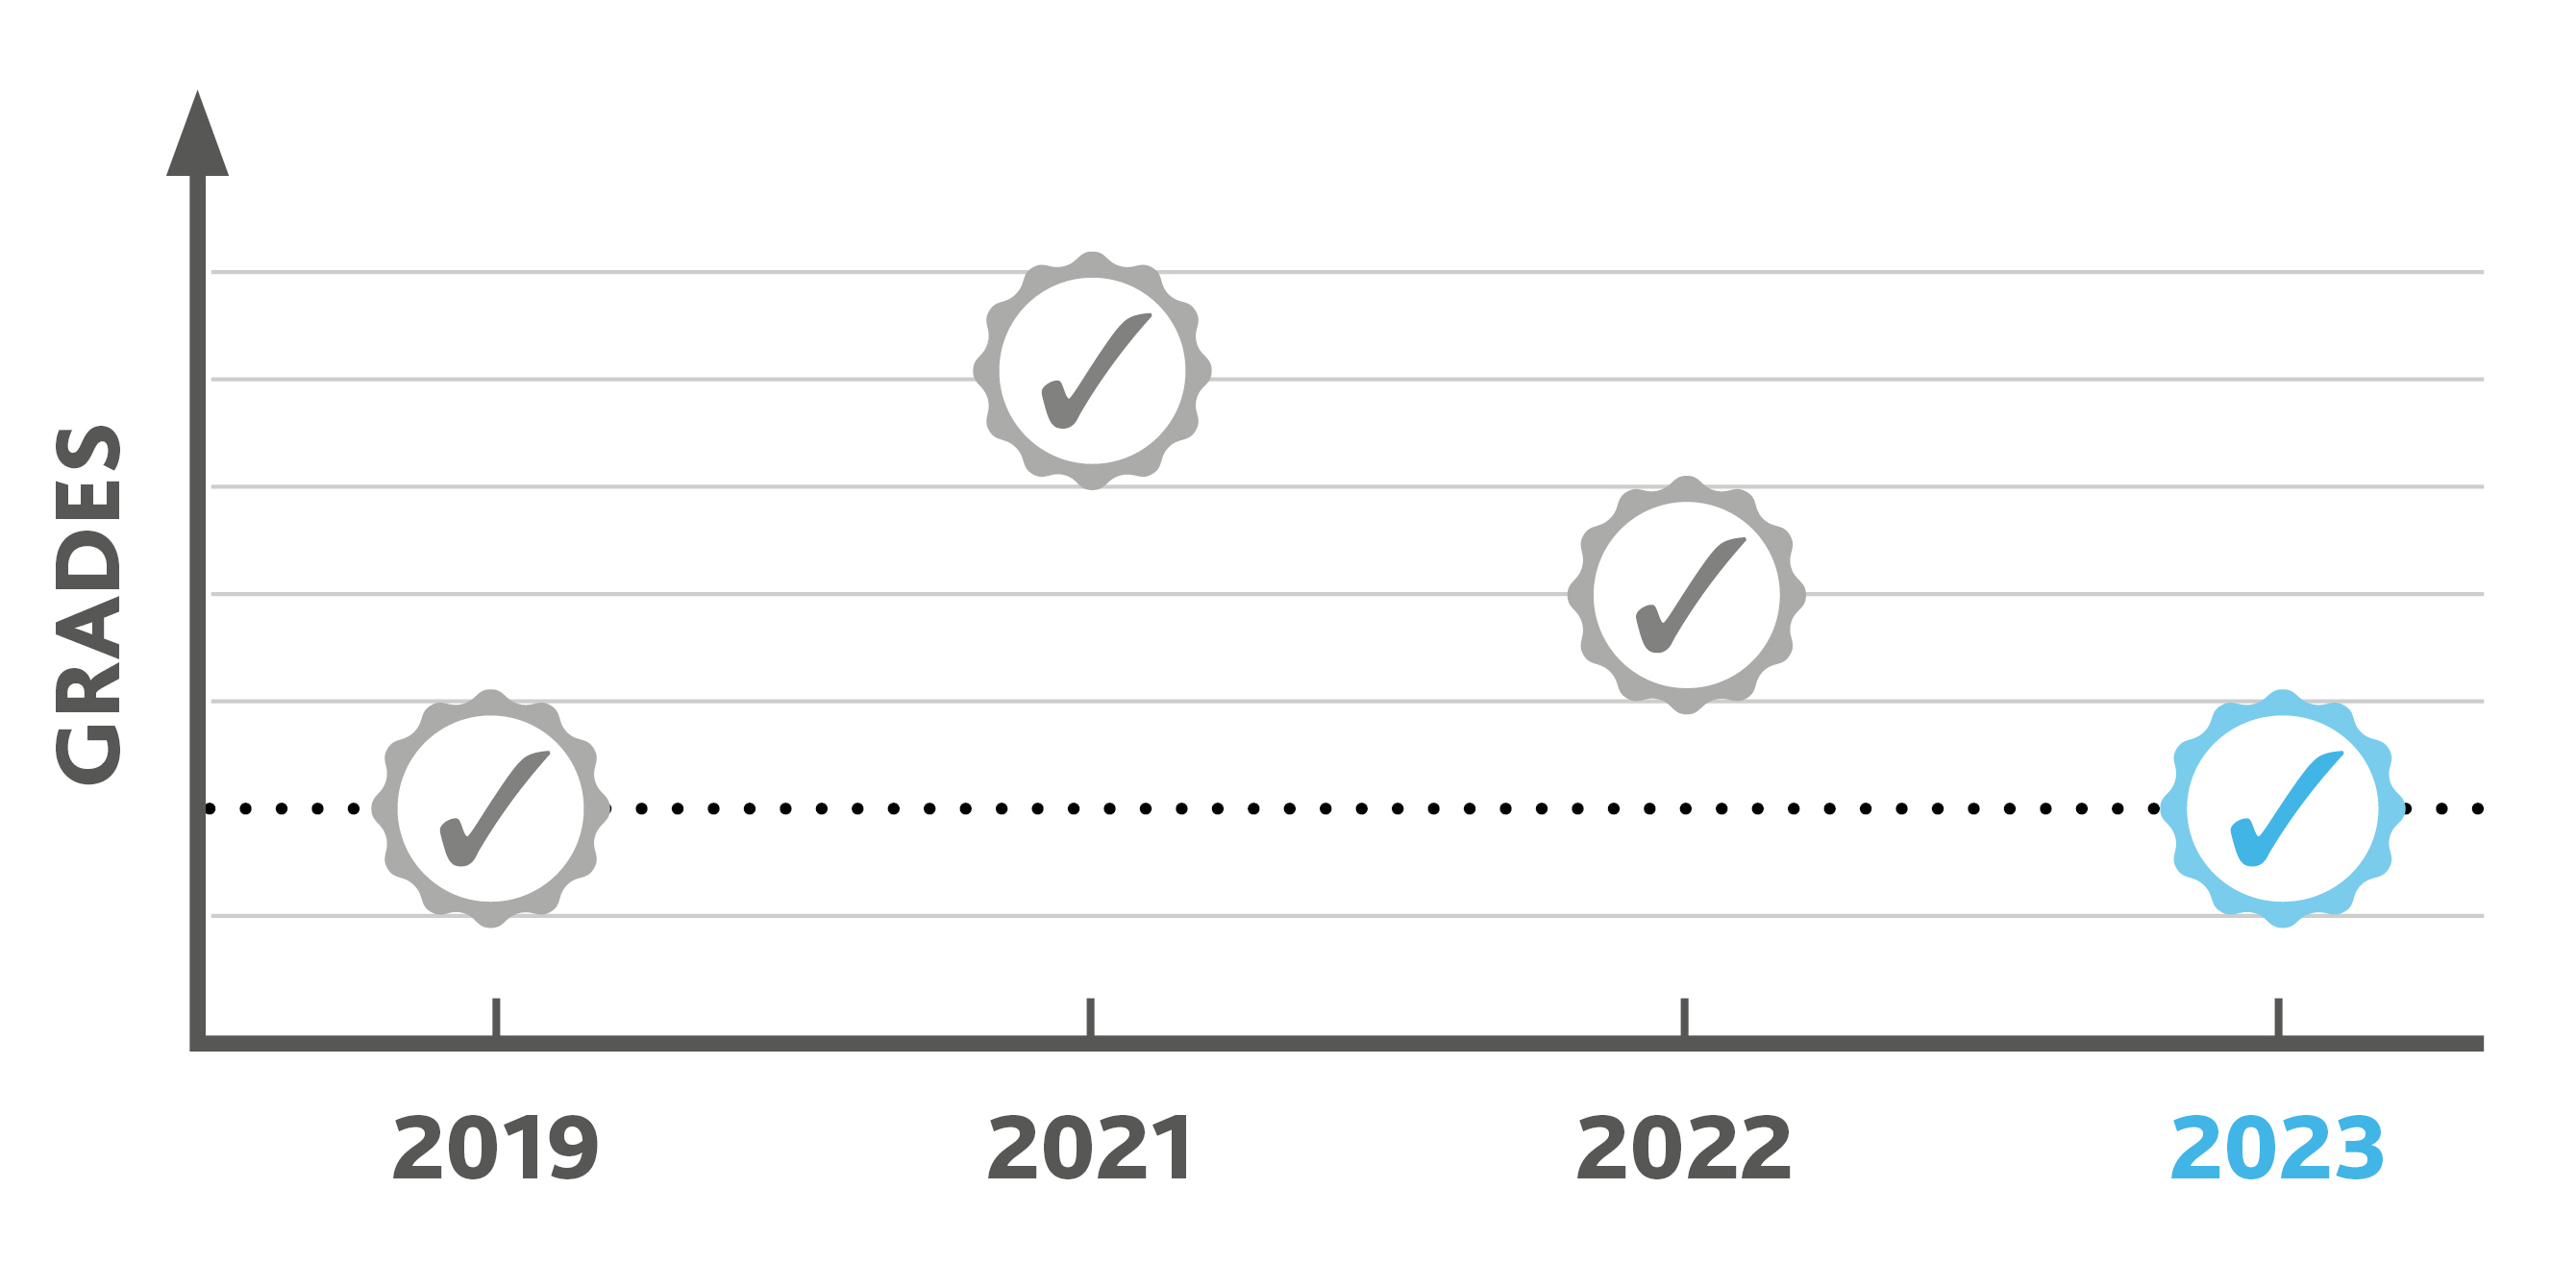 A graph showing the awarding standards from 2019 to 2023